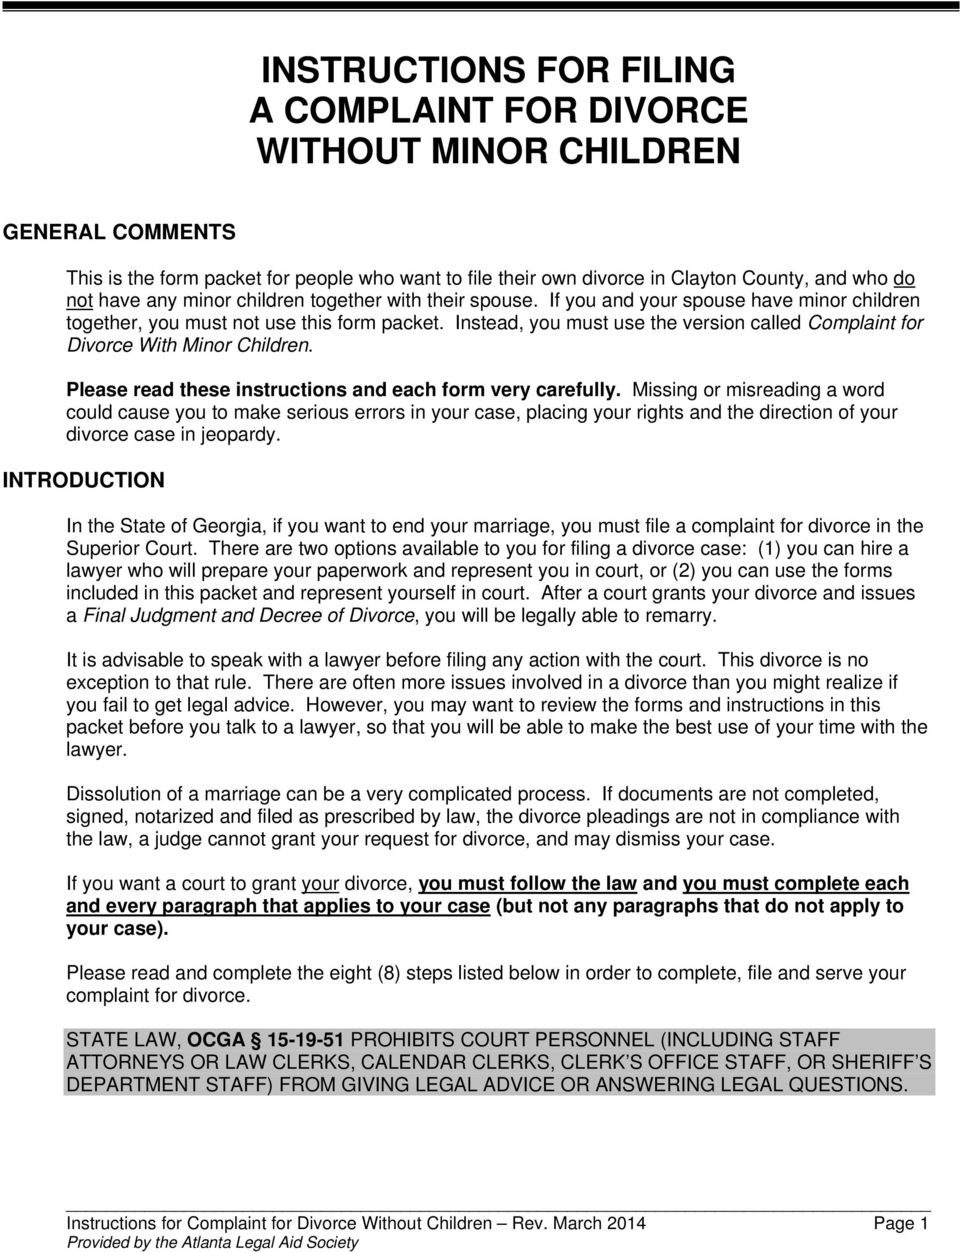 Instead, you must use the version called Complaint for Divorce With Minor Children. Please read these instructions and each form very carefully.